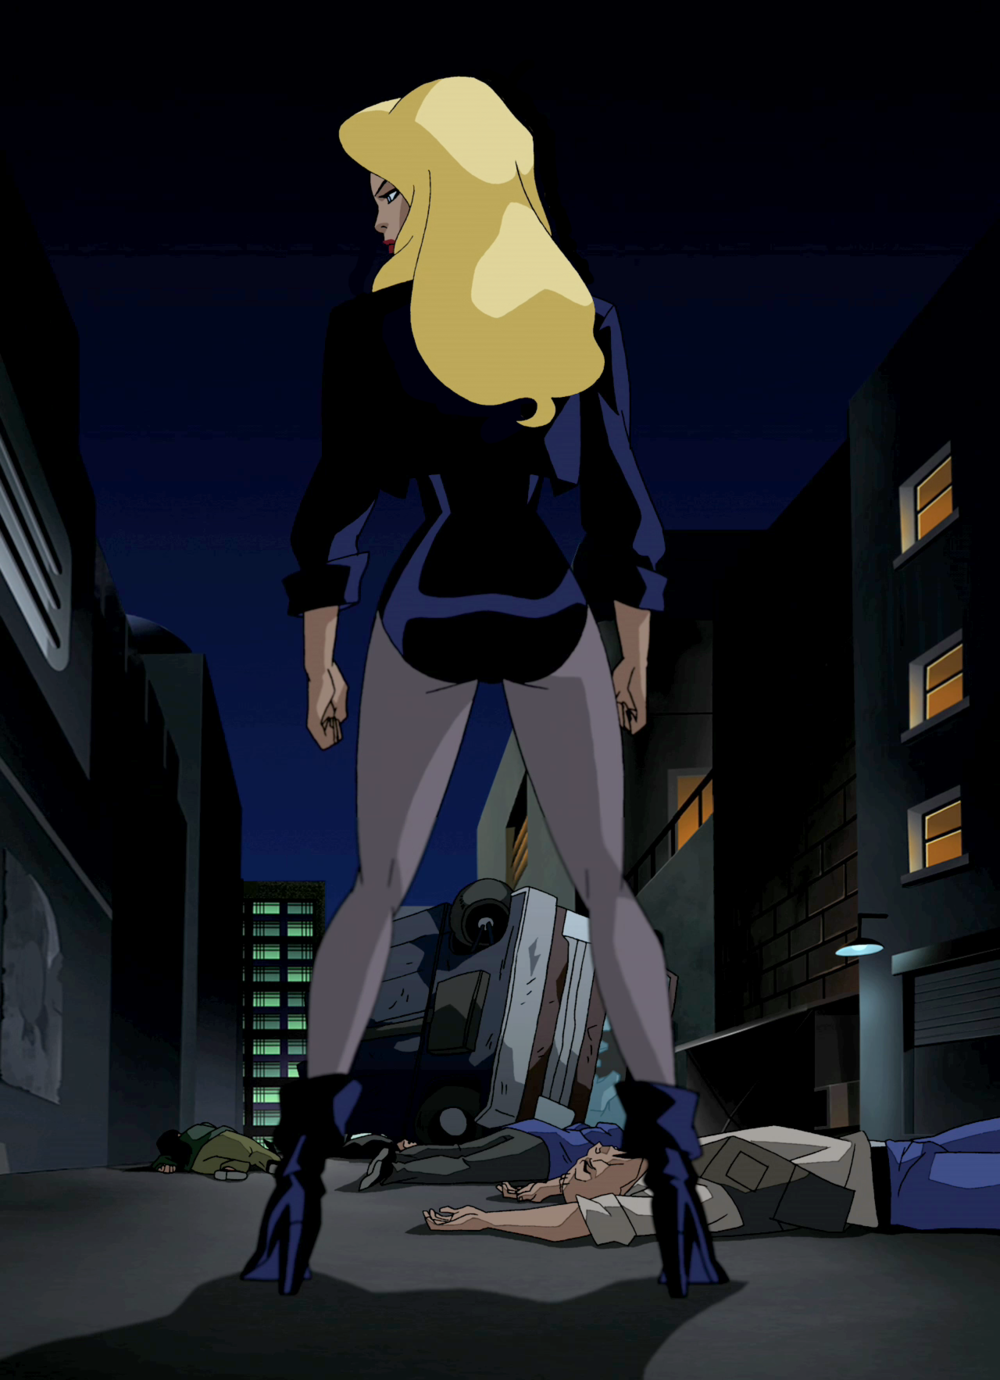 black_canary_jl_unimited_by_piper12345a-d4aazgk.png